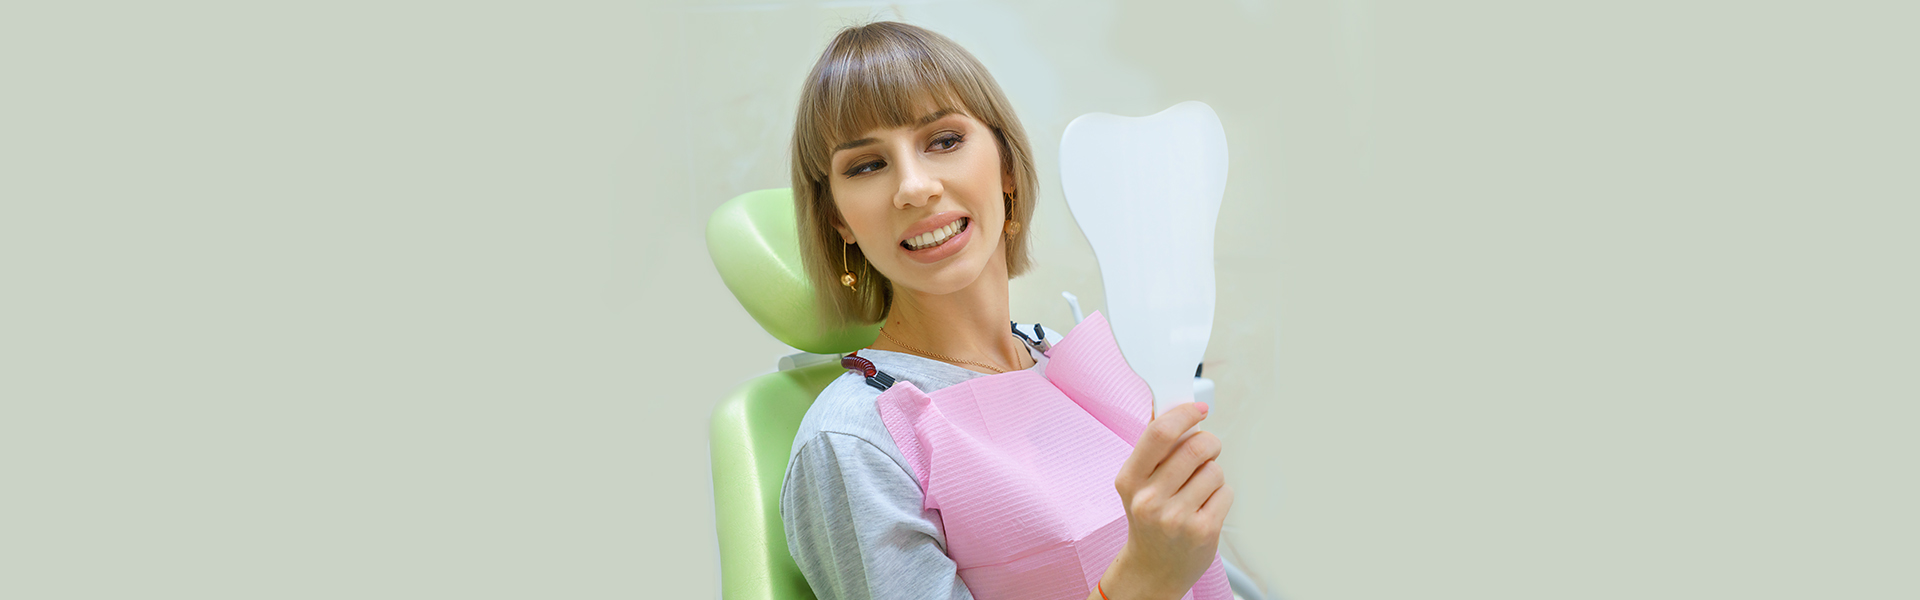 Dental Check-Up and Cleanings in Poway, CA